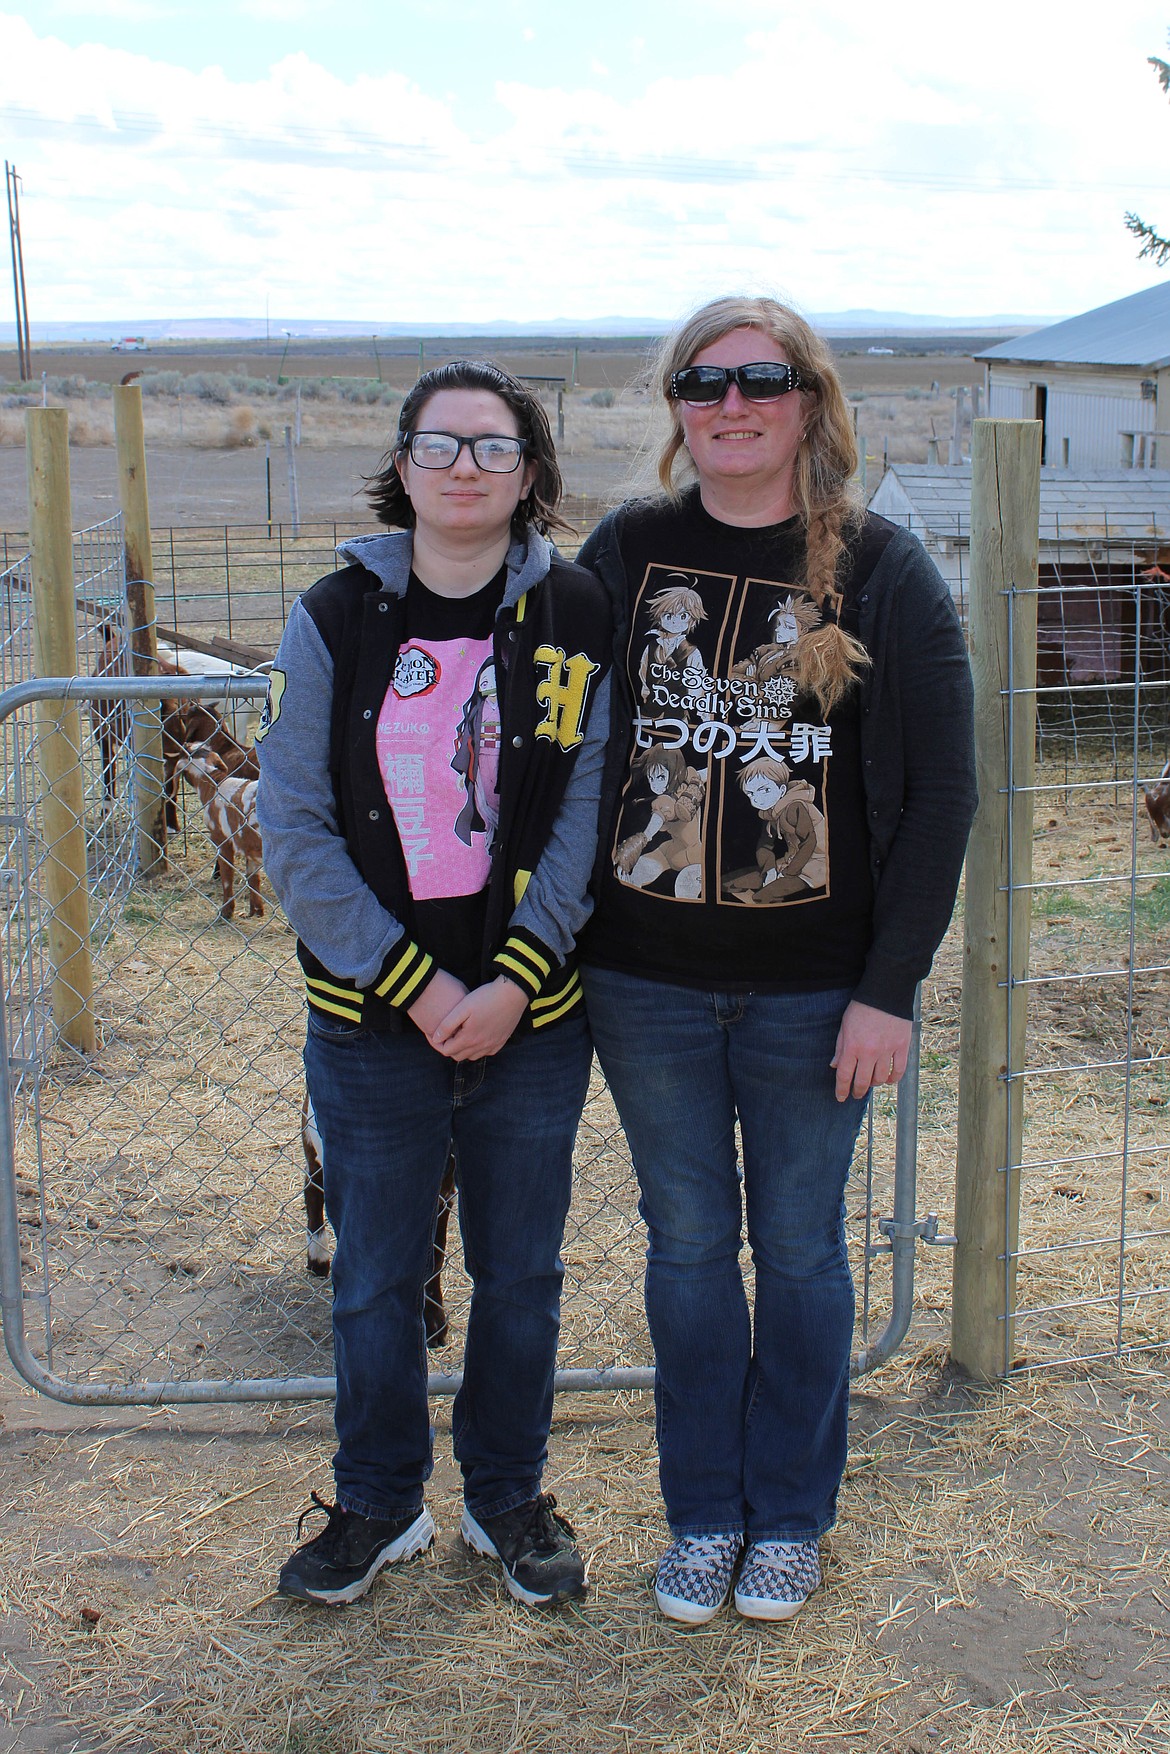 Kaitlin Baum (left) and her mom, Megan Baum (right) pose before their Boer goats at the barter faire on Sunday.